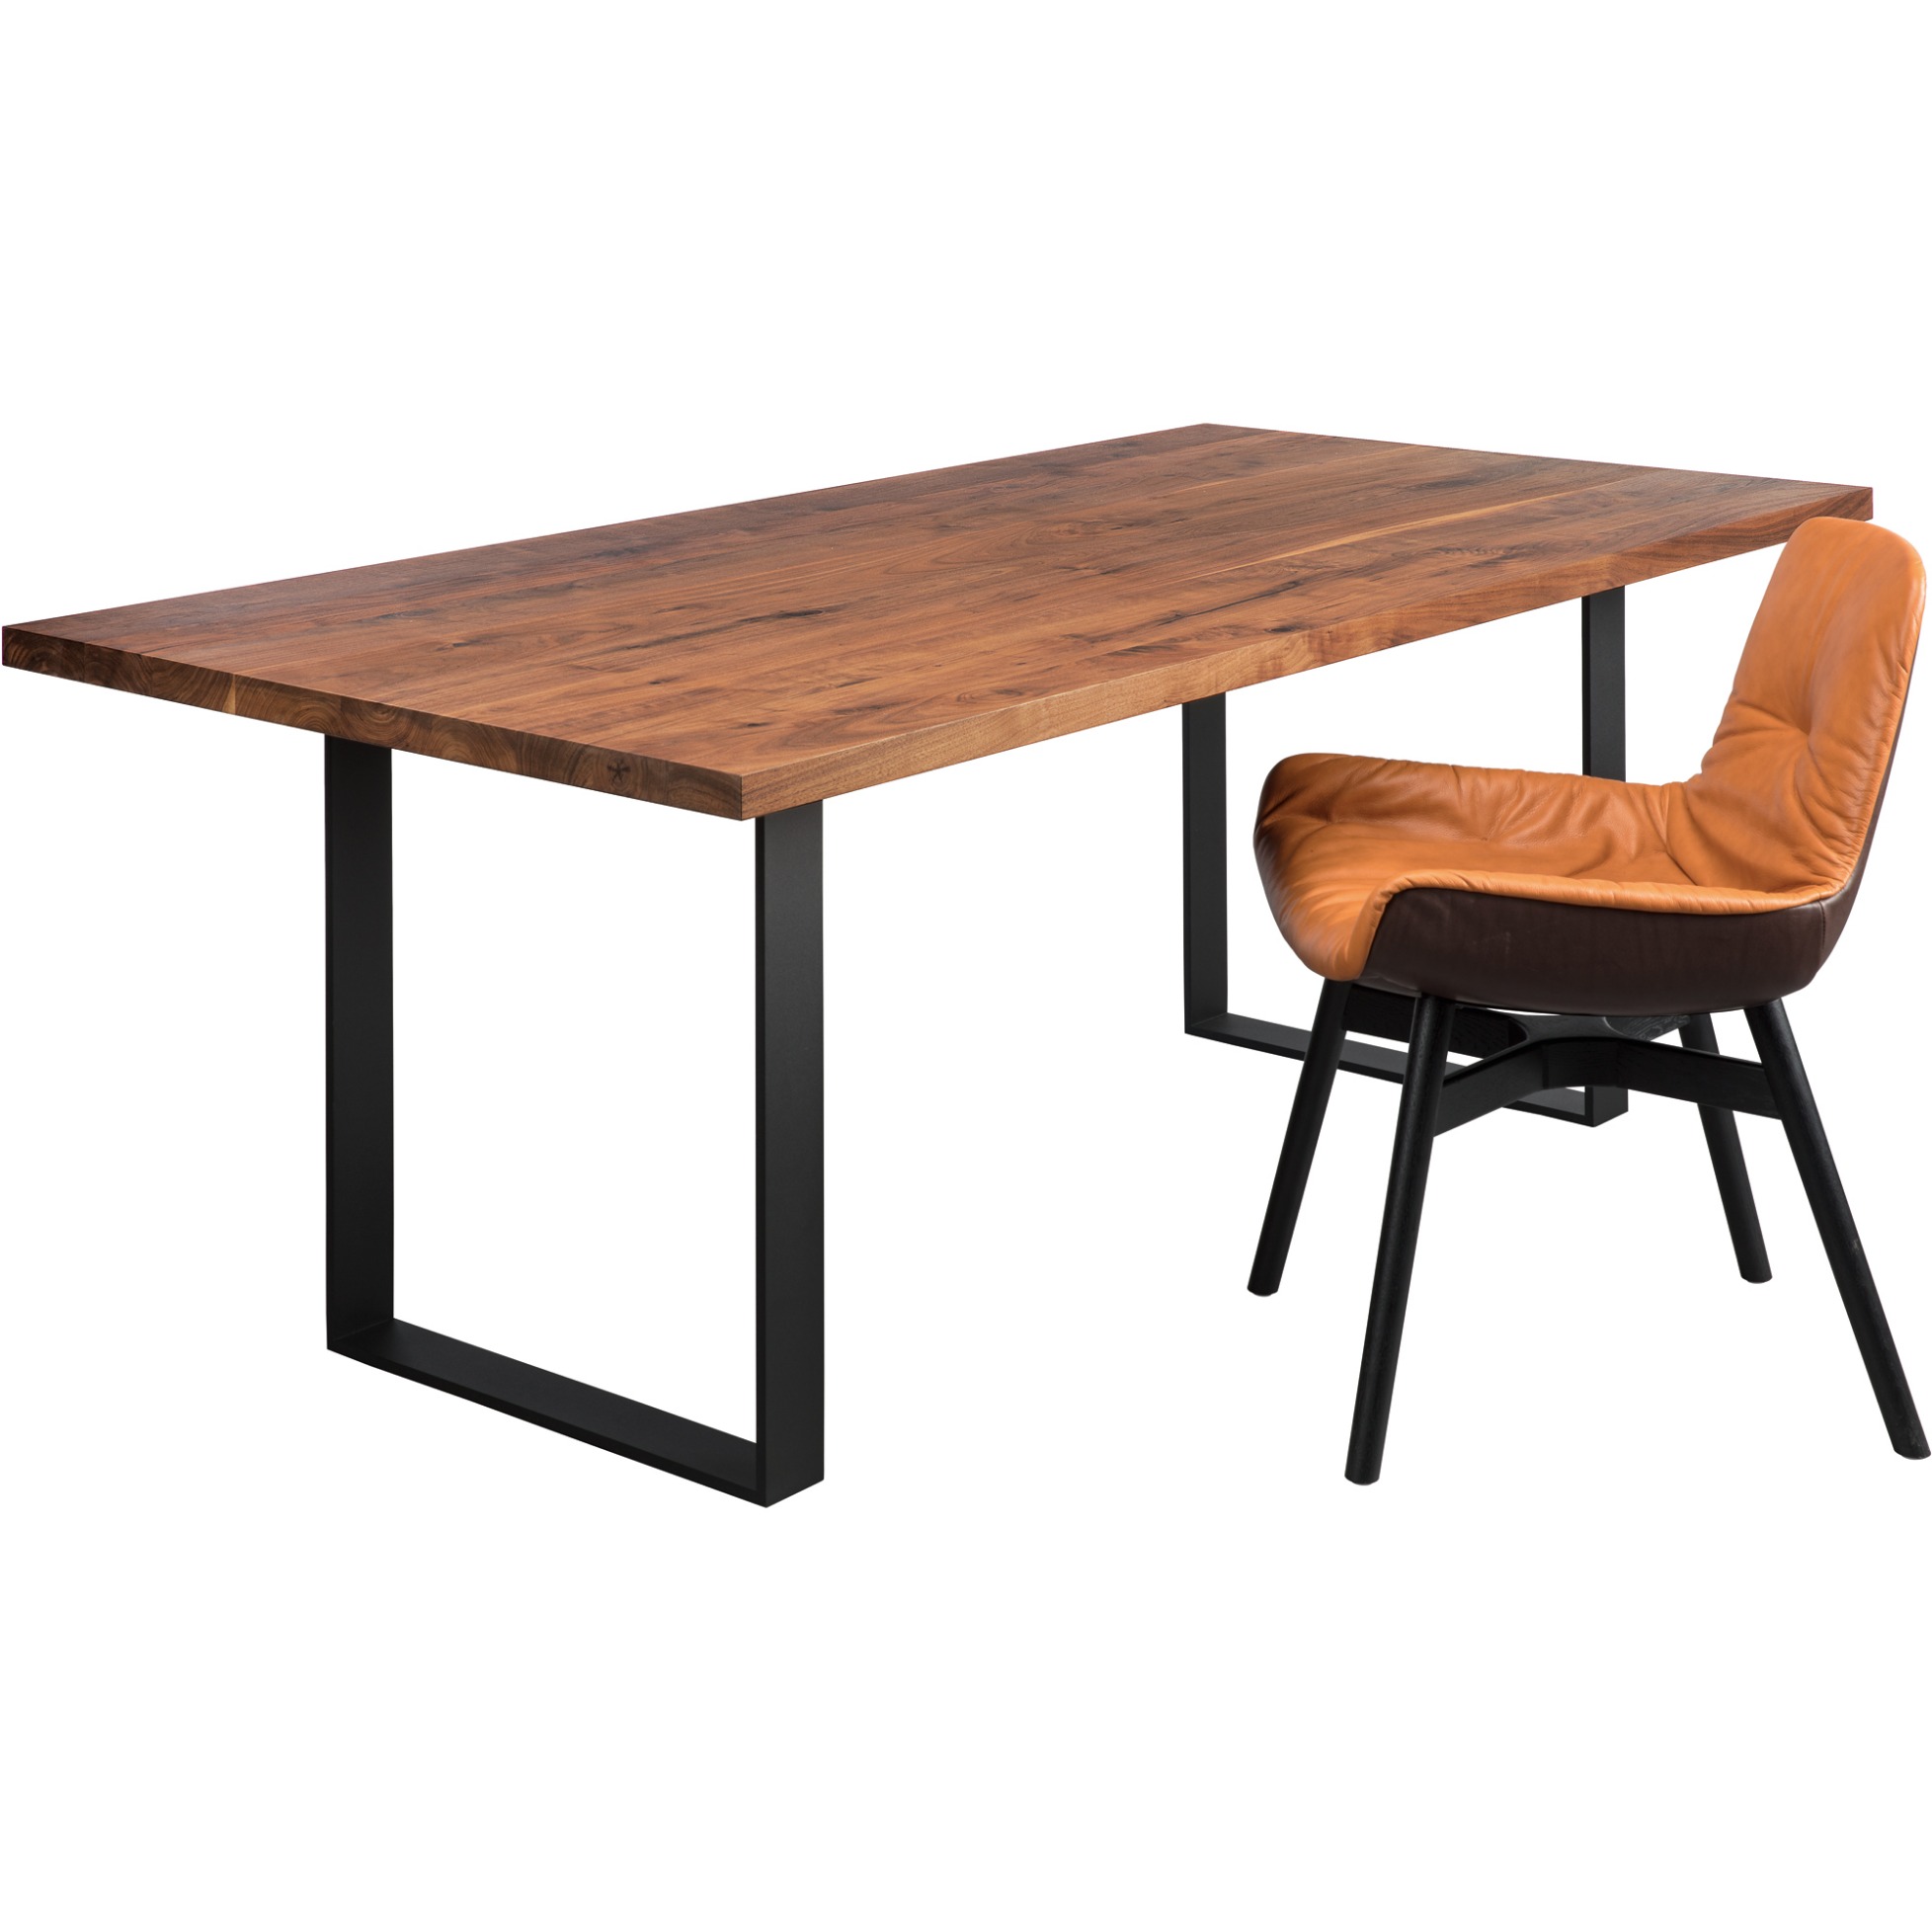 Sc58 Dining Table By Janua